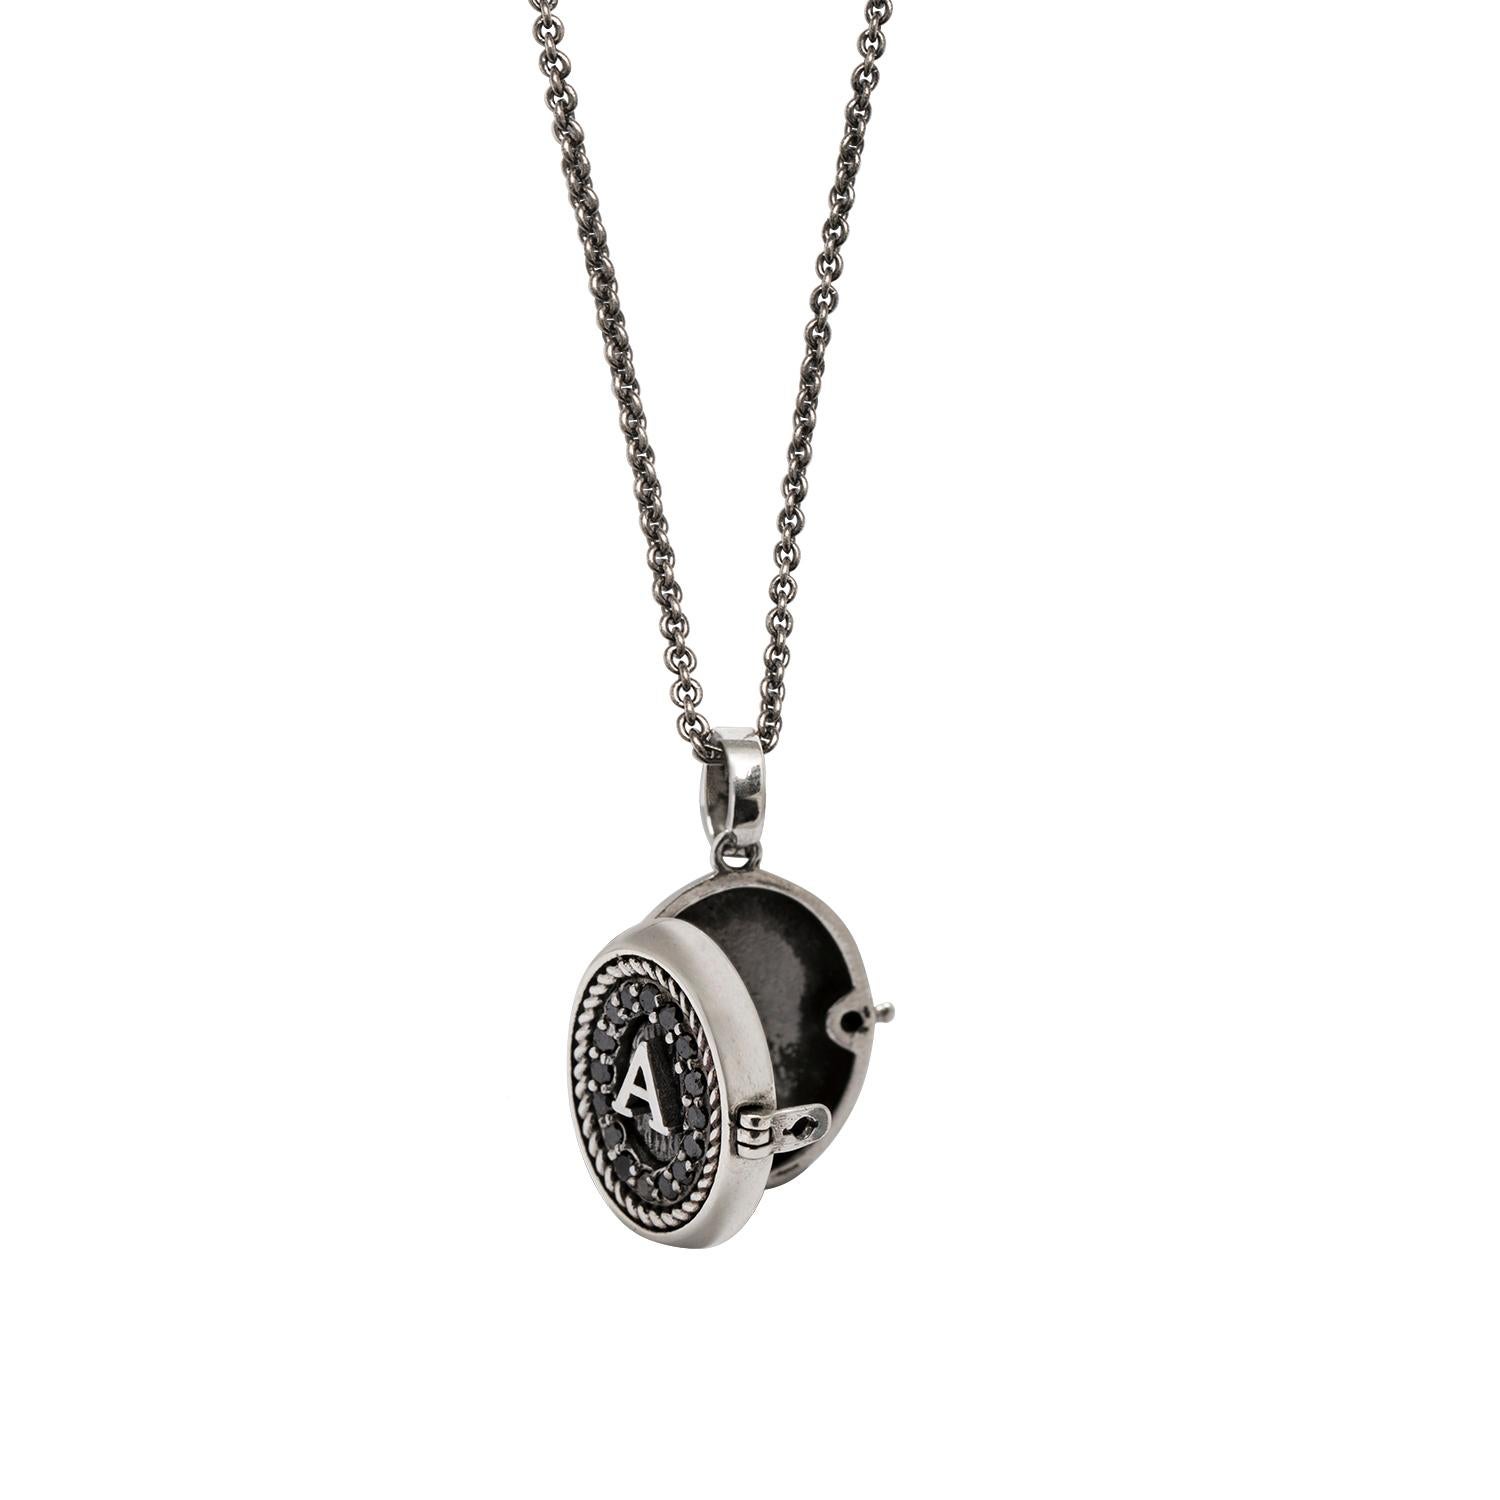 Round Cut Locket Necklace with Initials in Silver and Black Diamond Pavé from Iosselliani For Sale